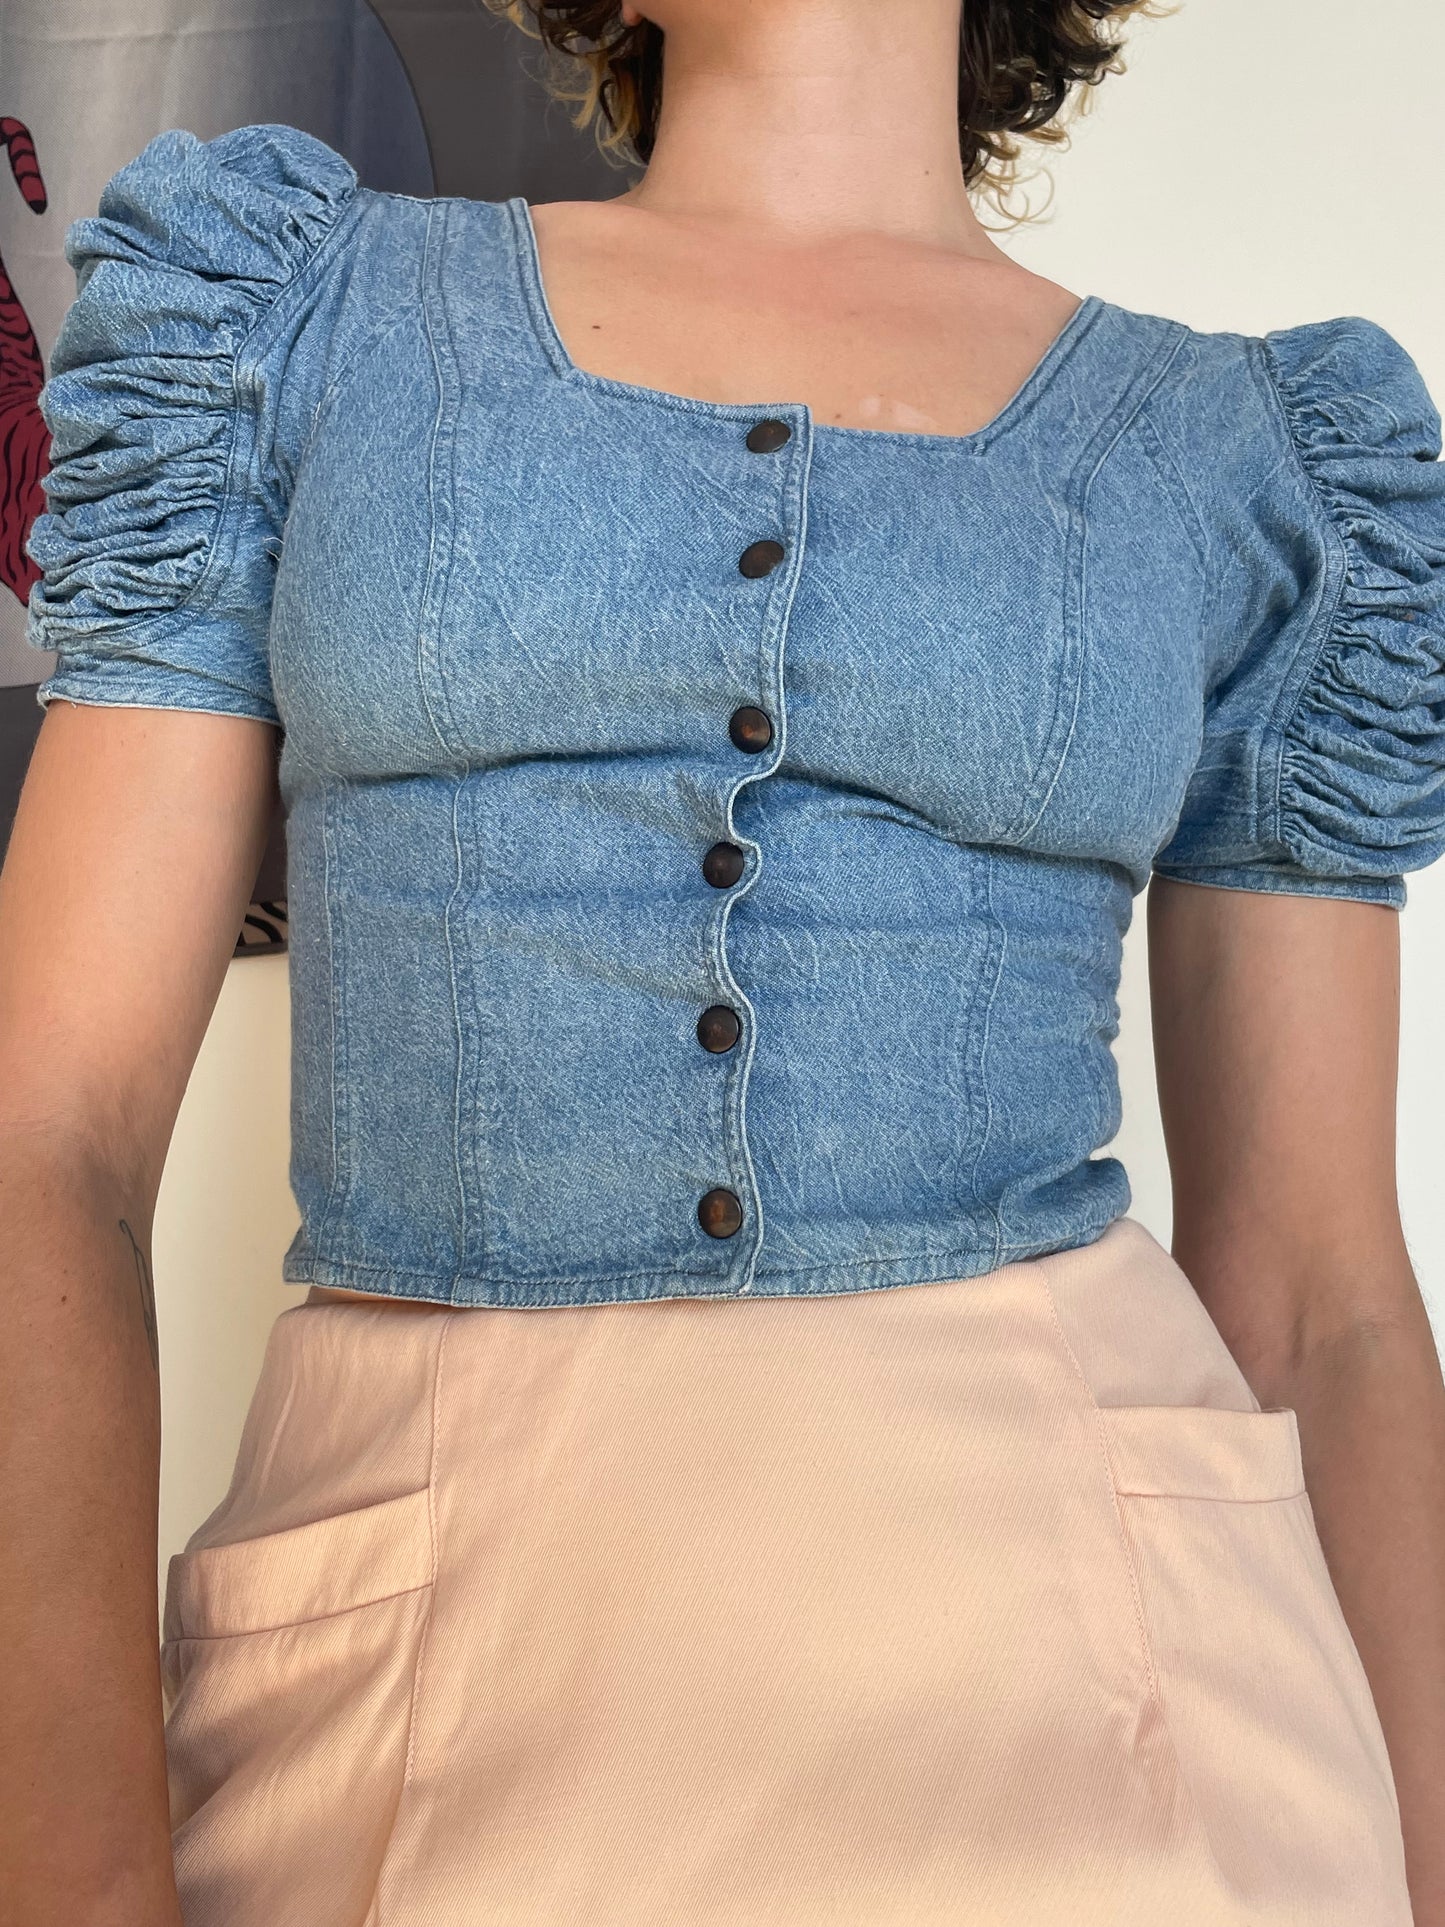 Krizia 90's jeans top with puffy sleeves